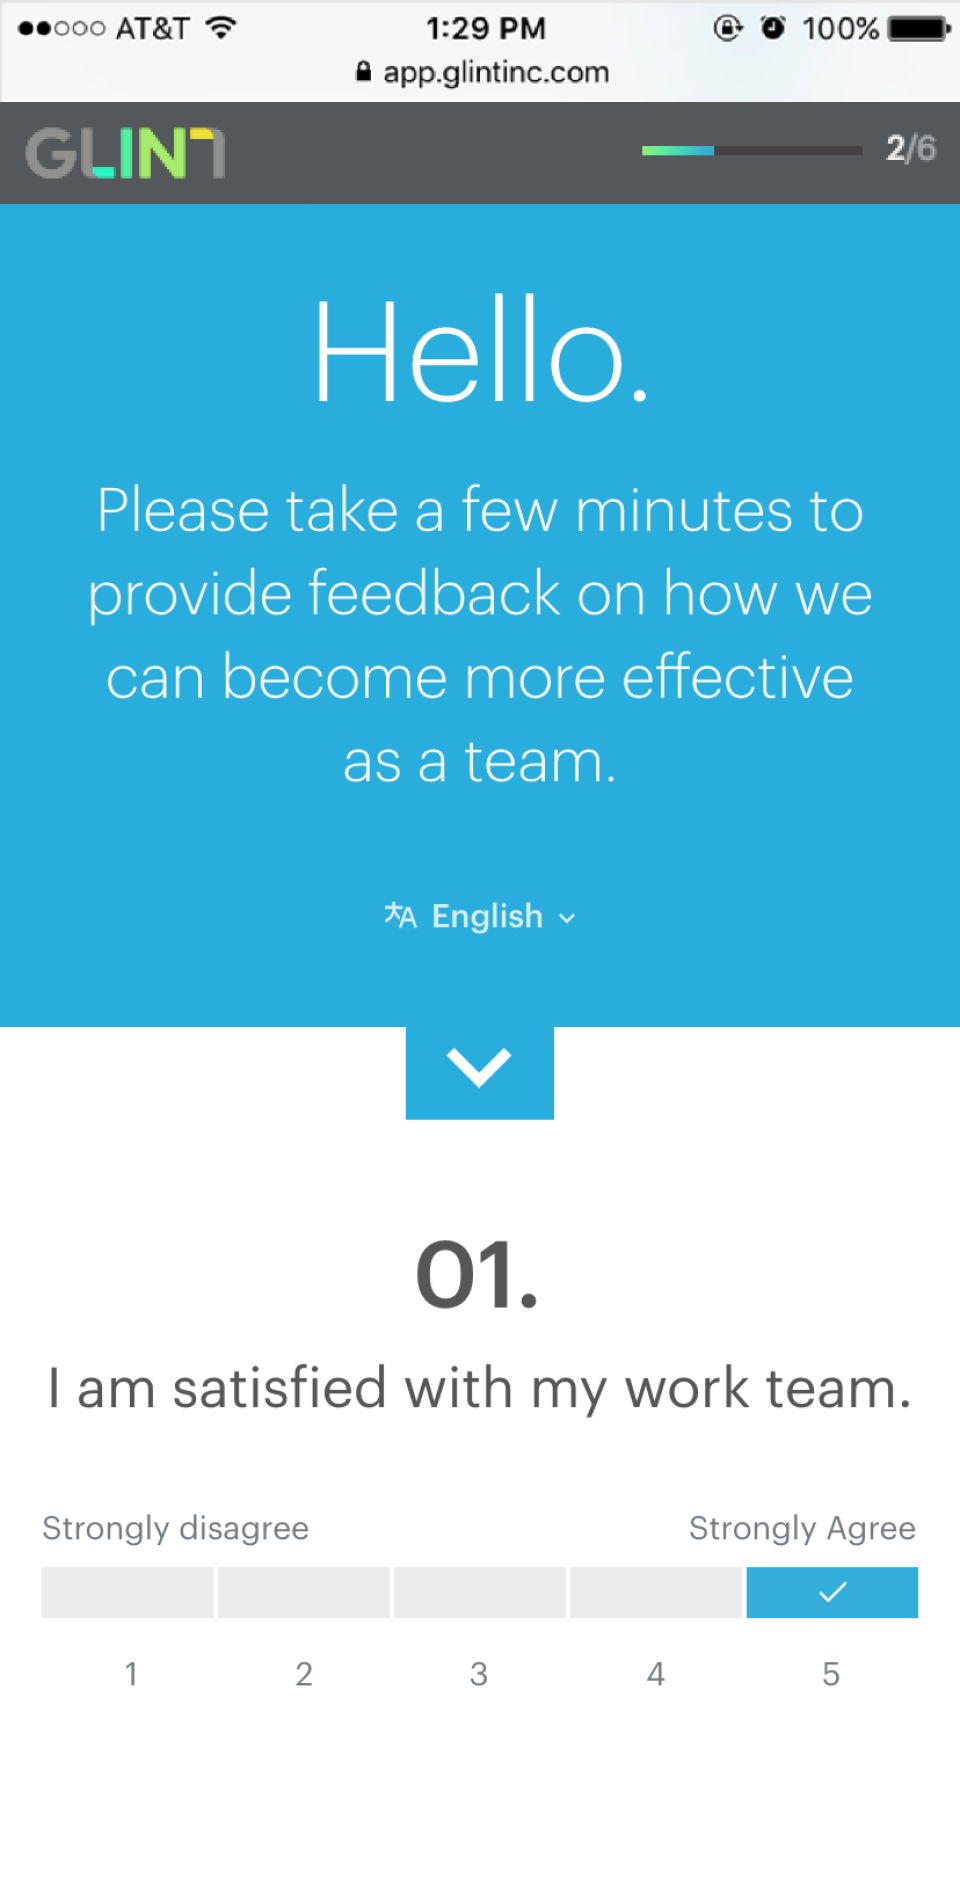 Glint Software - And example of Glint's Team Effectiveness pulse survey sent to an employee and optimized for answering across mobile devices